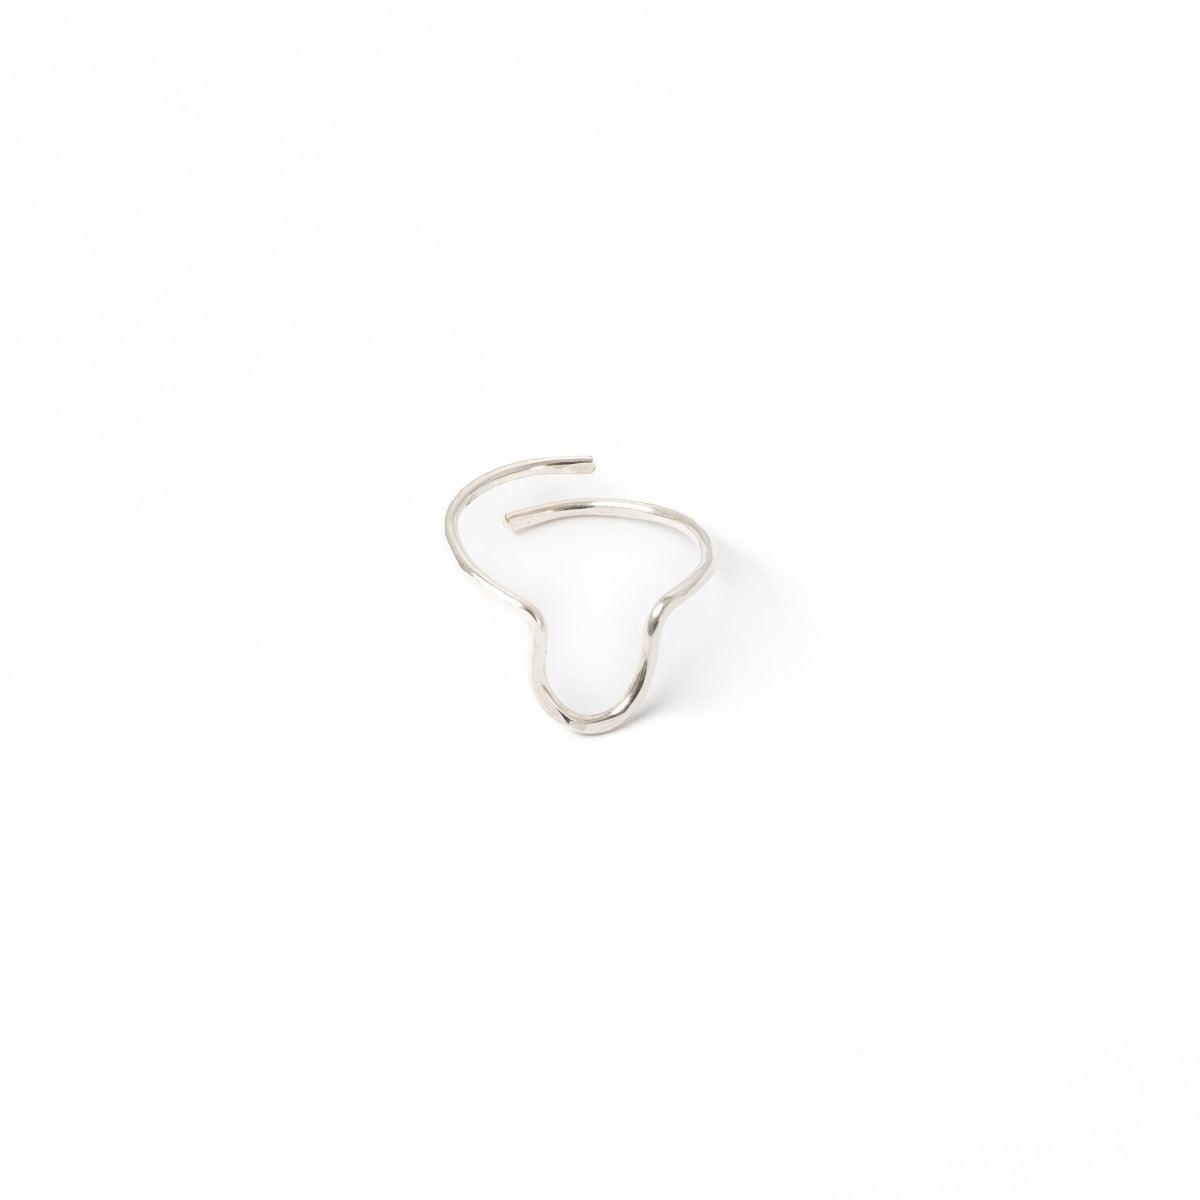 Lara Hammered Ring in Sterling Silver - Forai